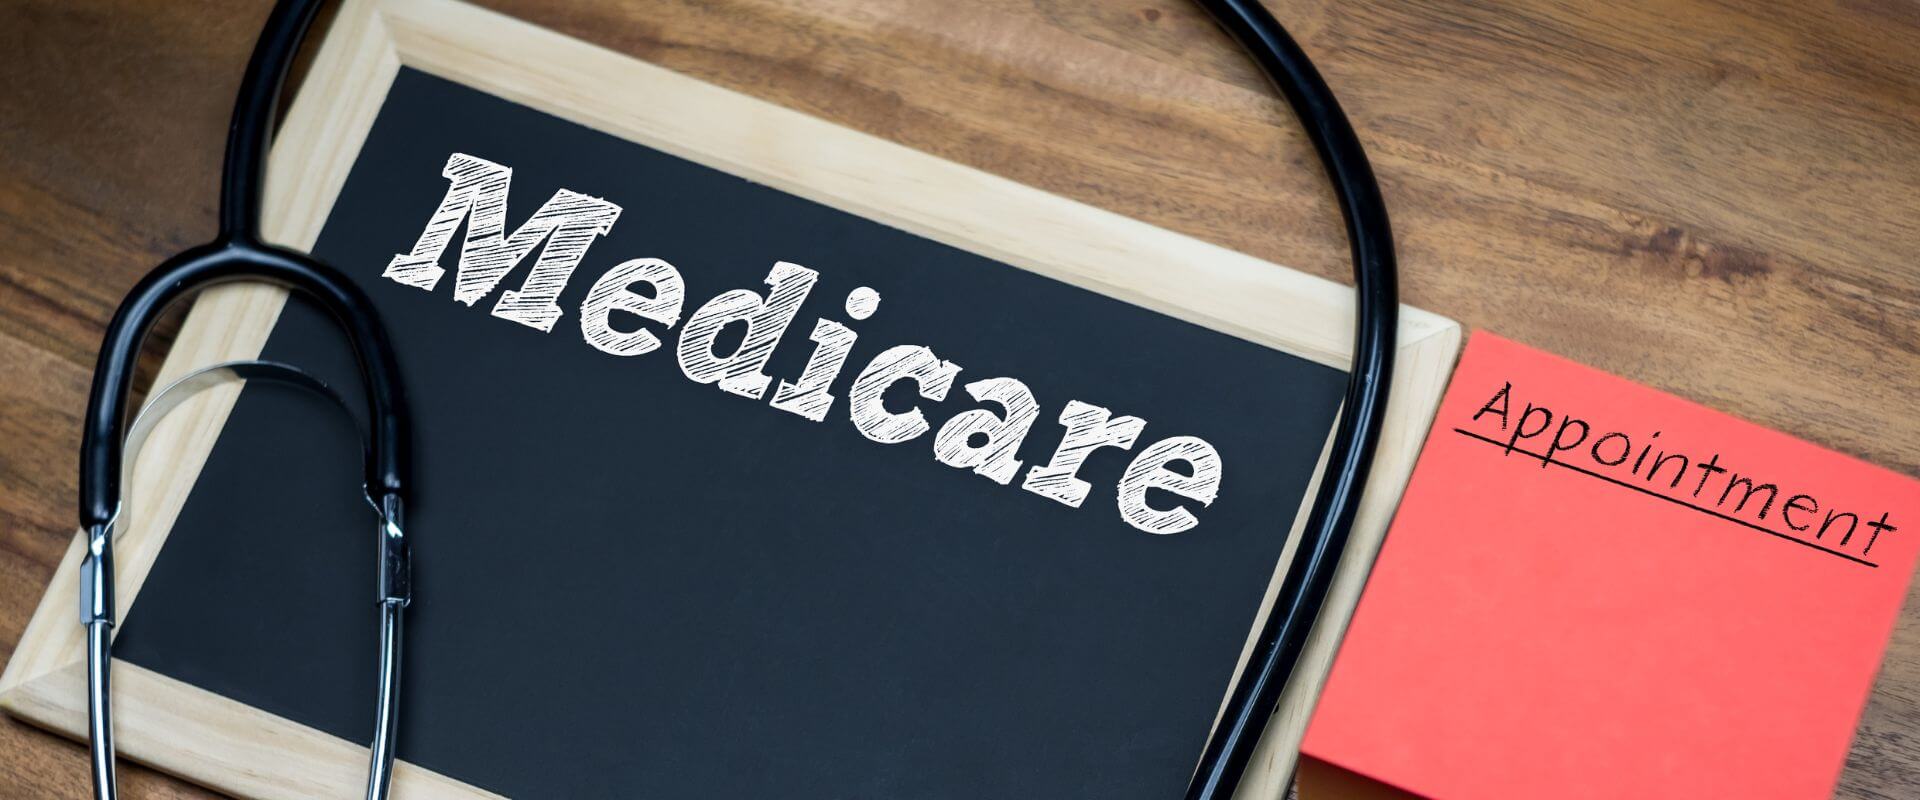 Medicare Parts and Plans